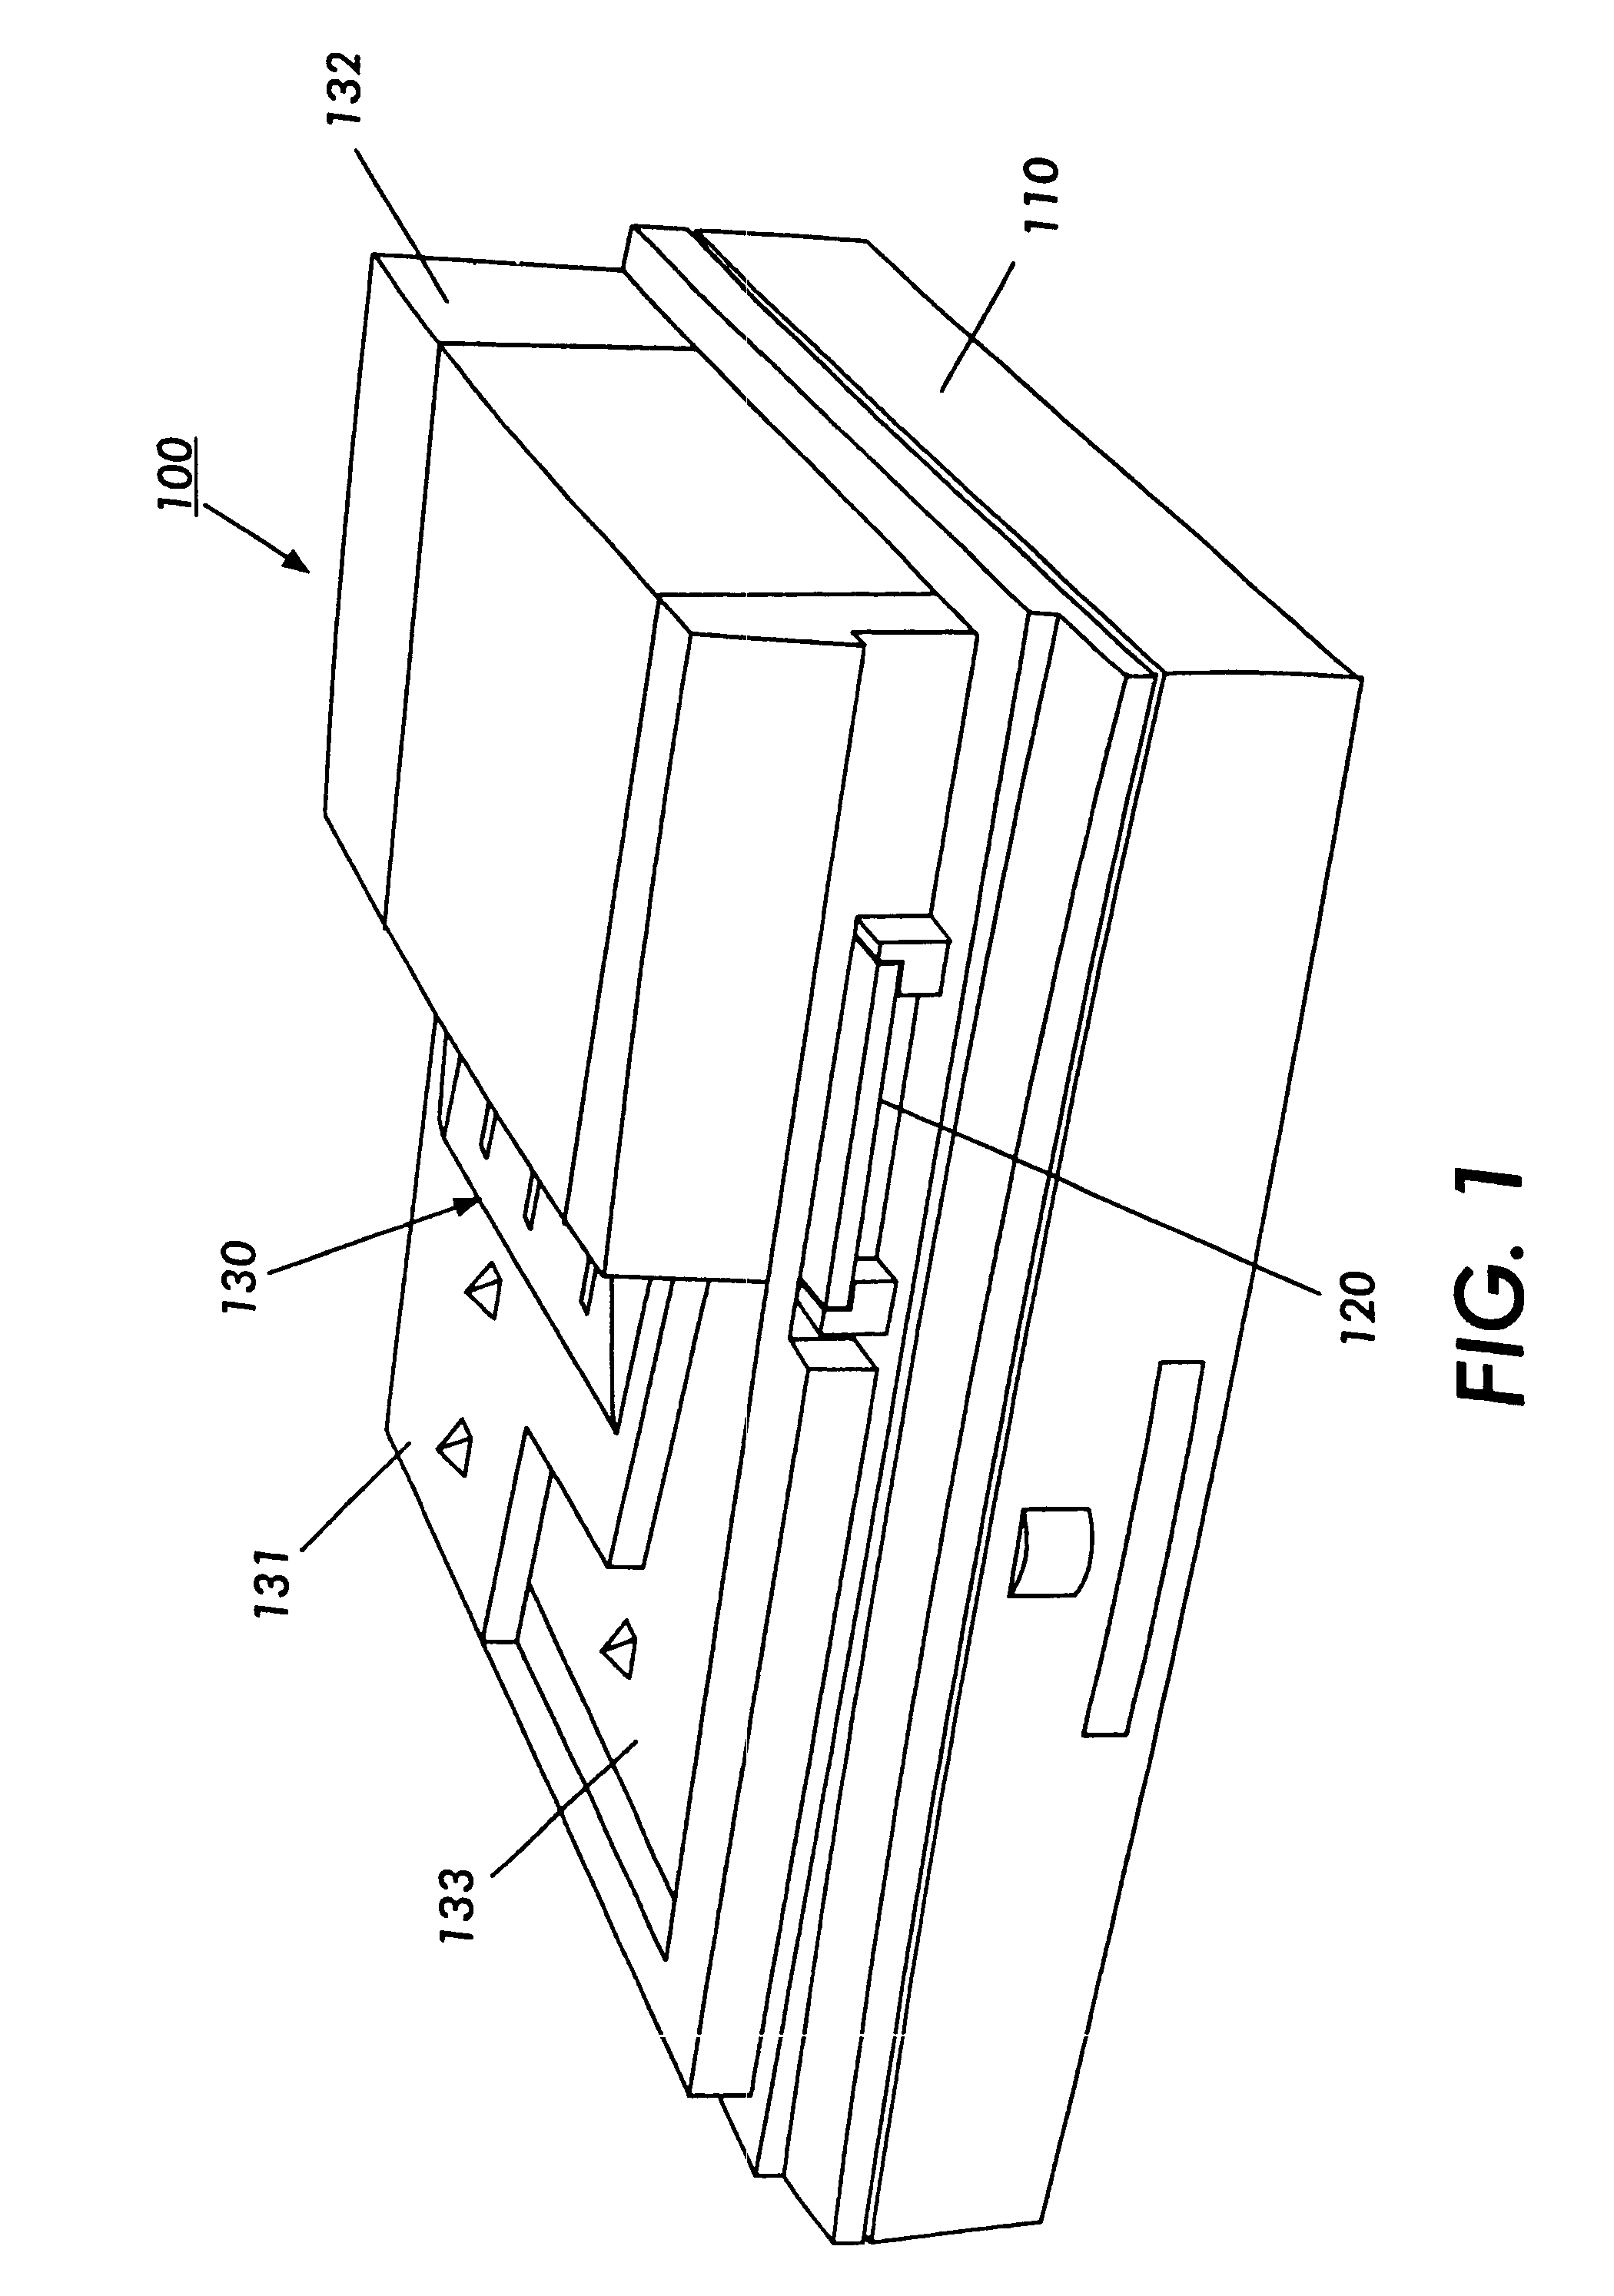 Systems and methods scaling a captured image using predetermined scale information